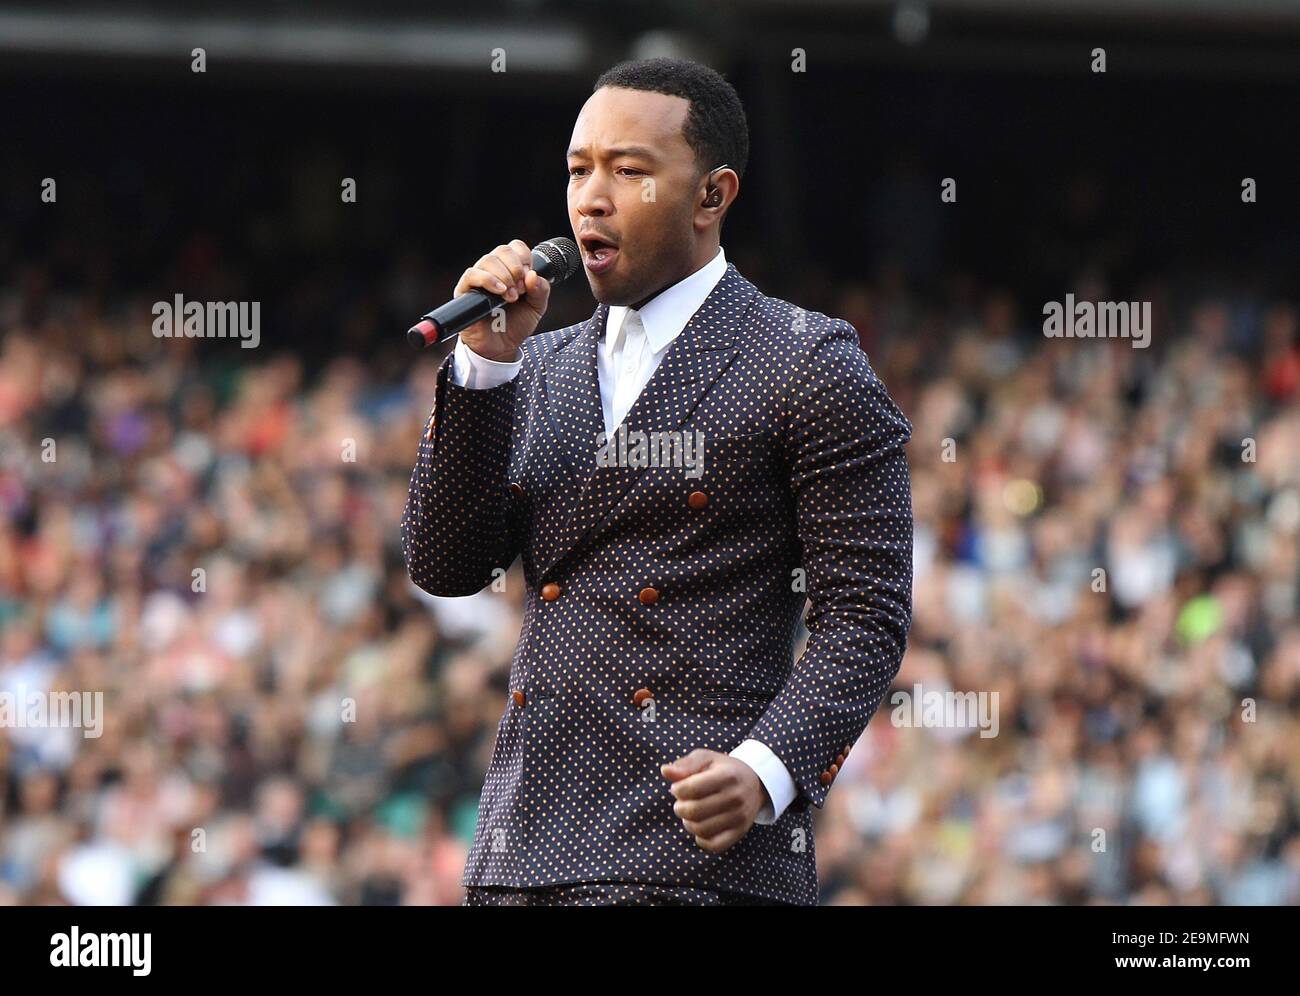 Twickenham, UK. 1st June 2013. John Legend performs on stage at Sound of Change Live Concert at Chime for Change at Twickenham Stadium in Twickenham. Credit: S.A.M./Alamy   CREDIT: S.A.M./ALamy Stock Photo